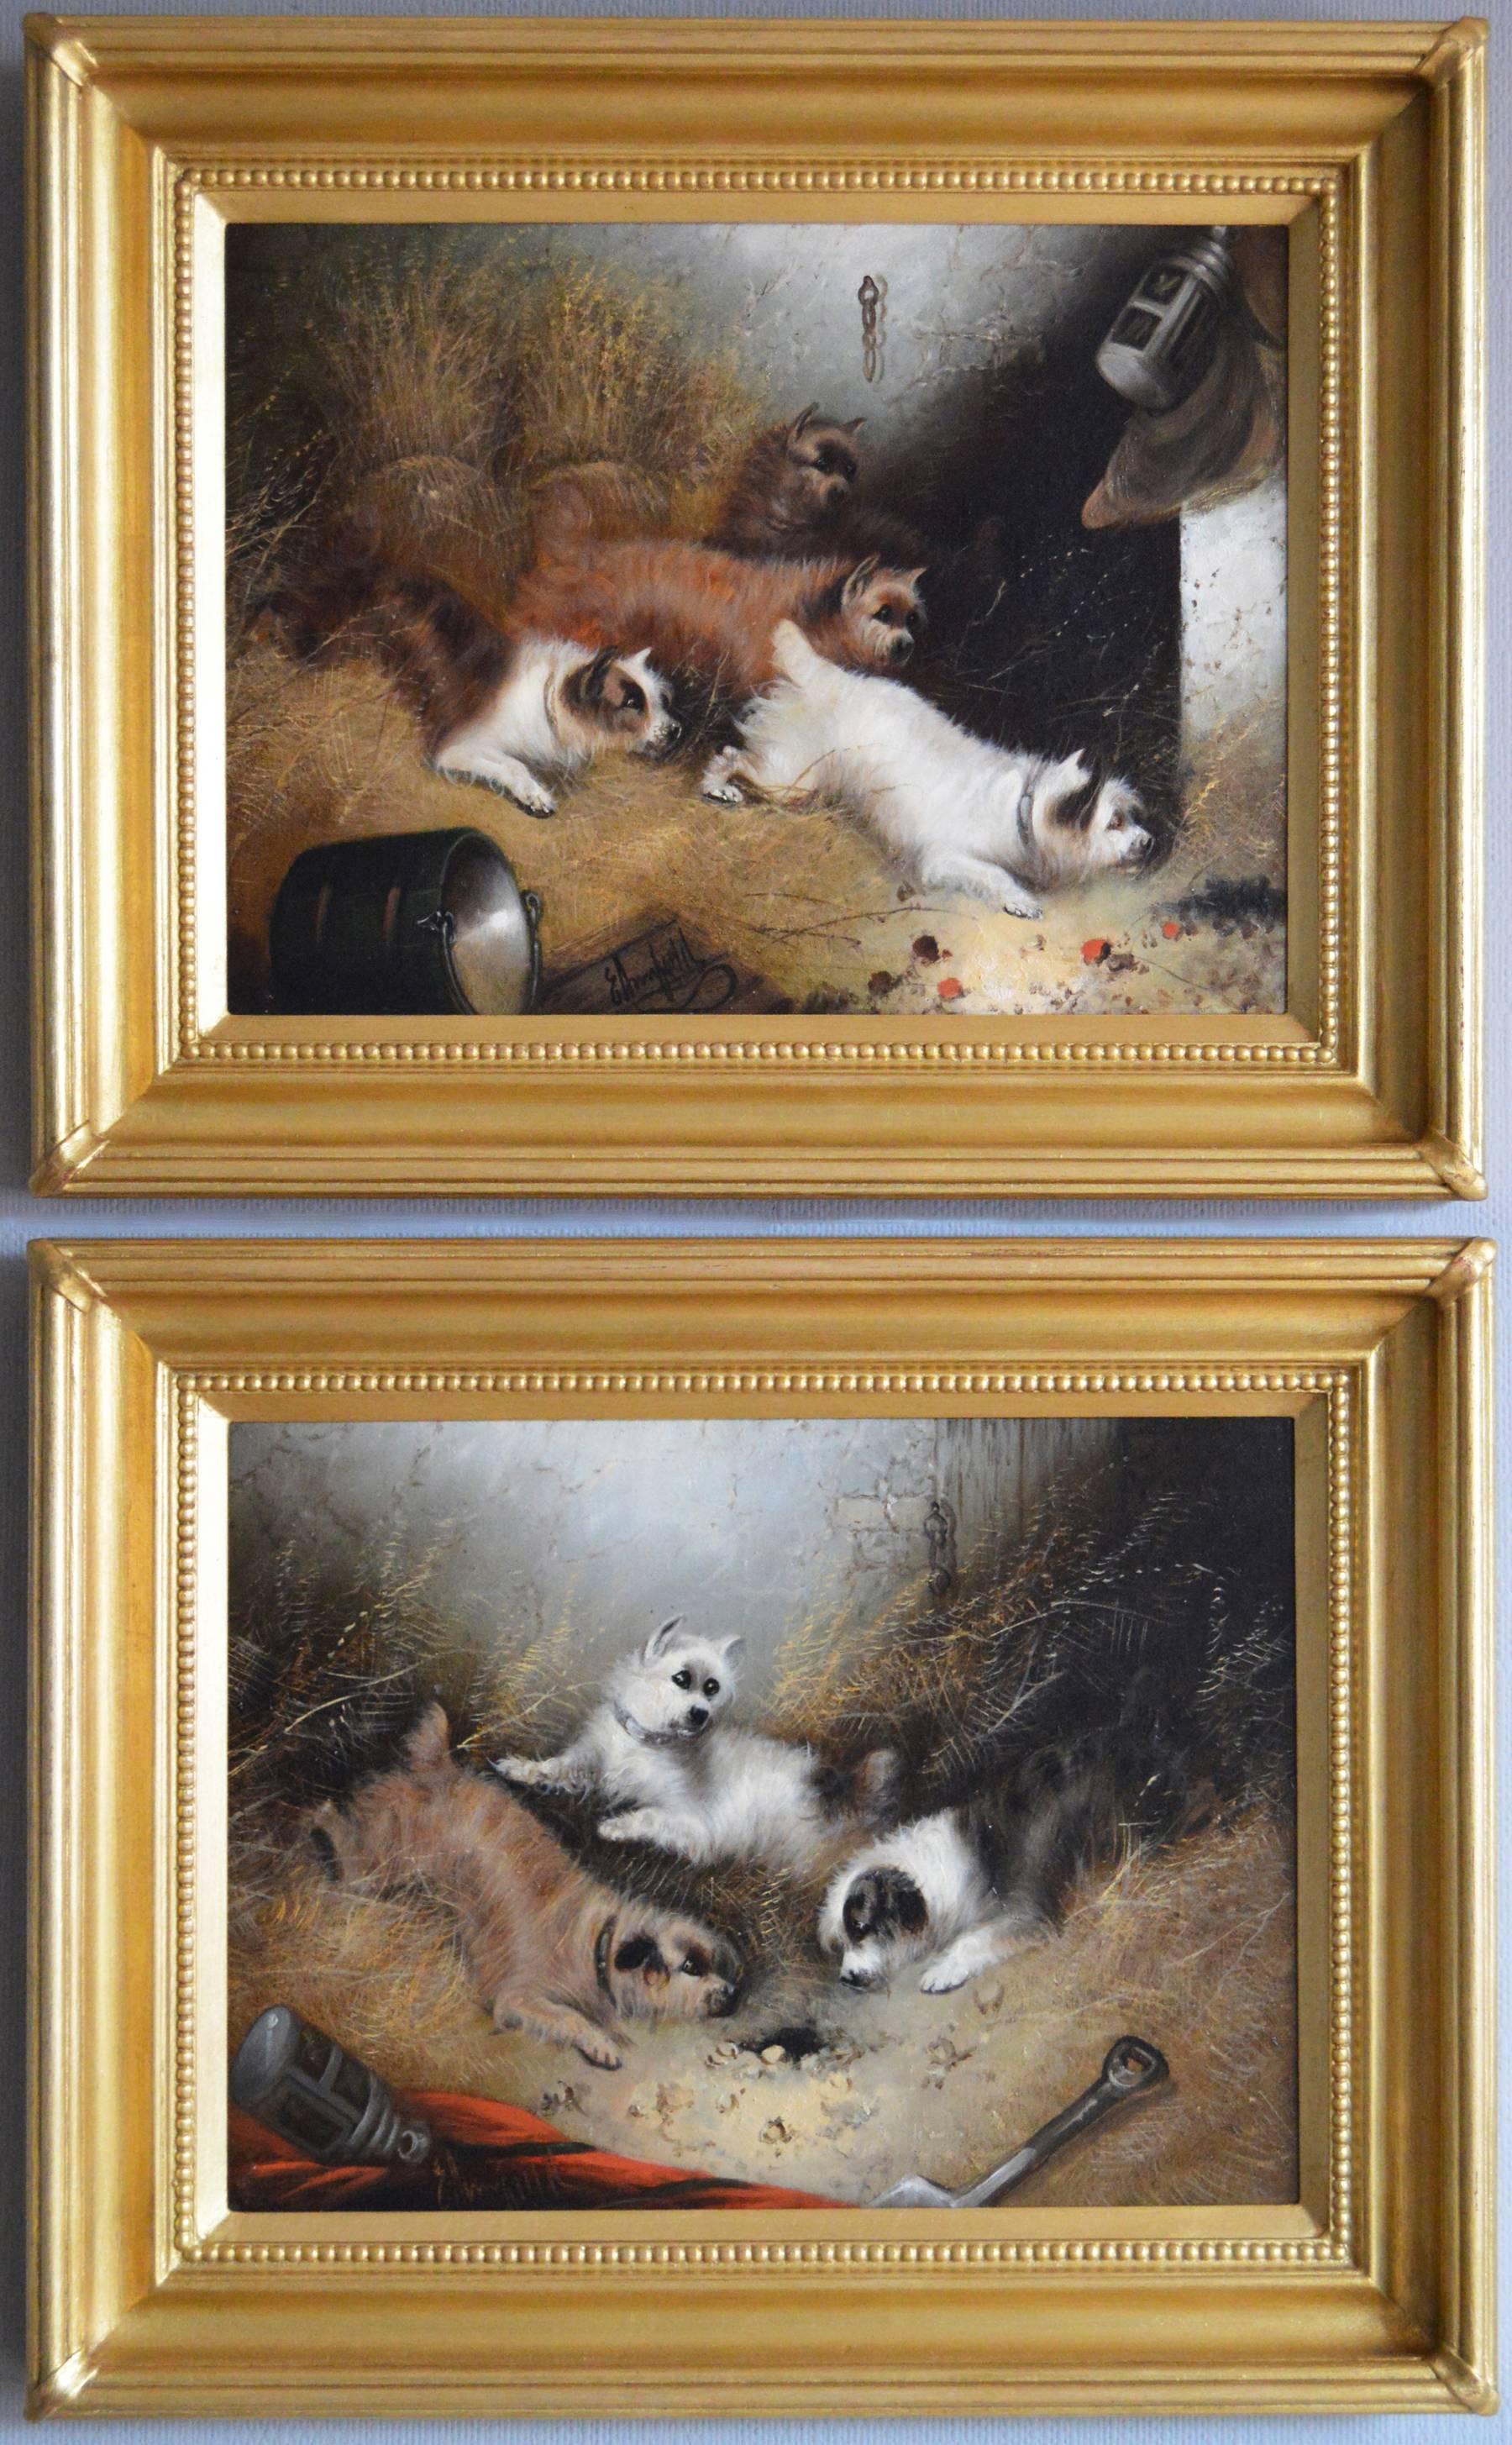 Edward Armfield Animal Painting - 19th Century pair of oil paintings with terriers ratting in a barn